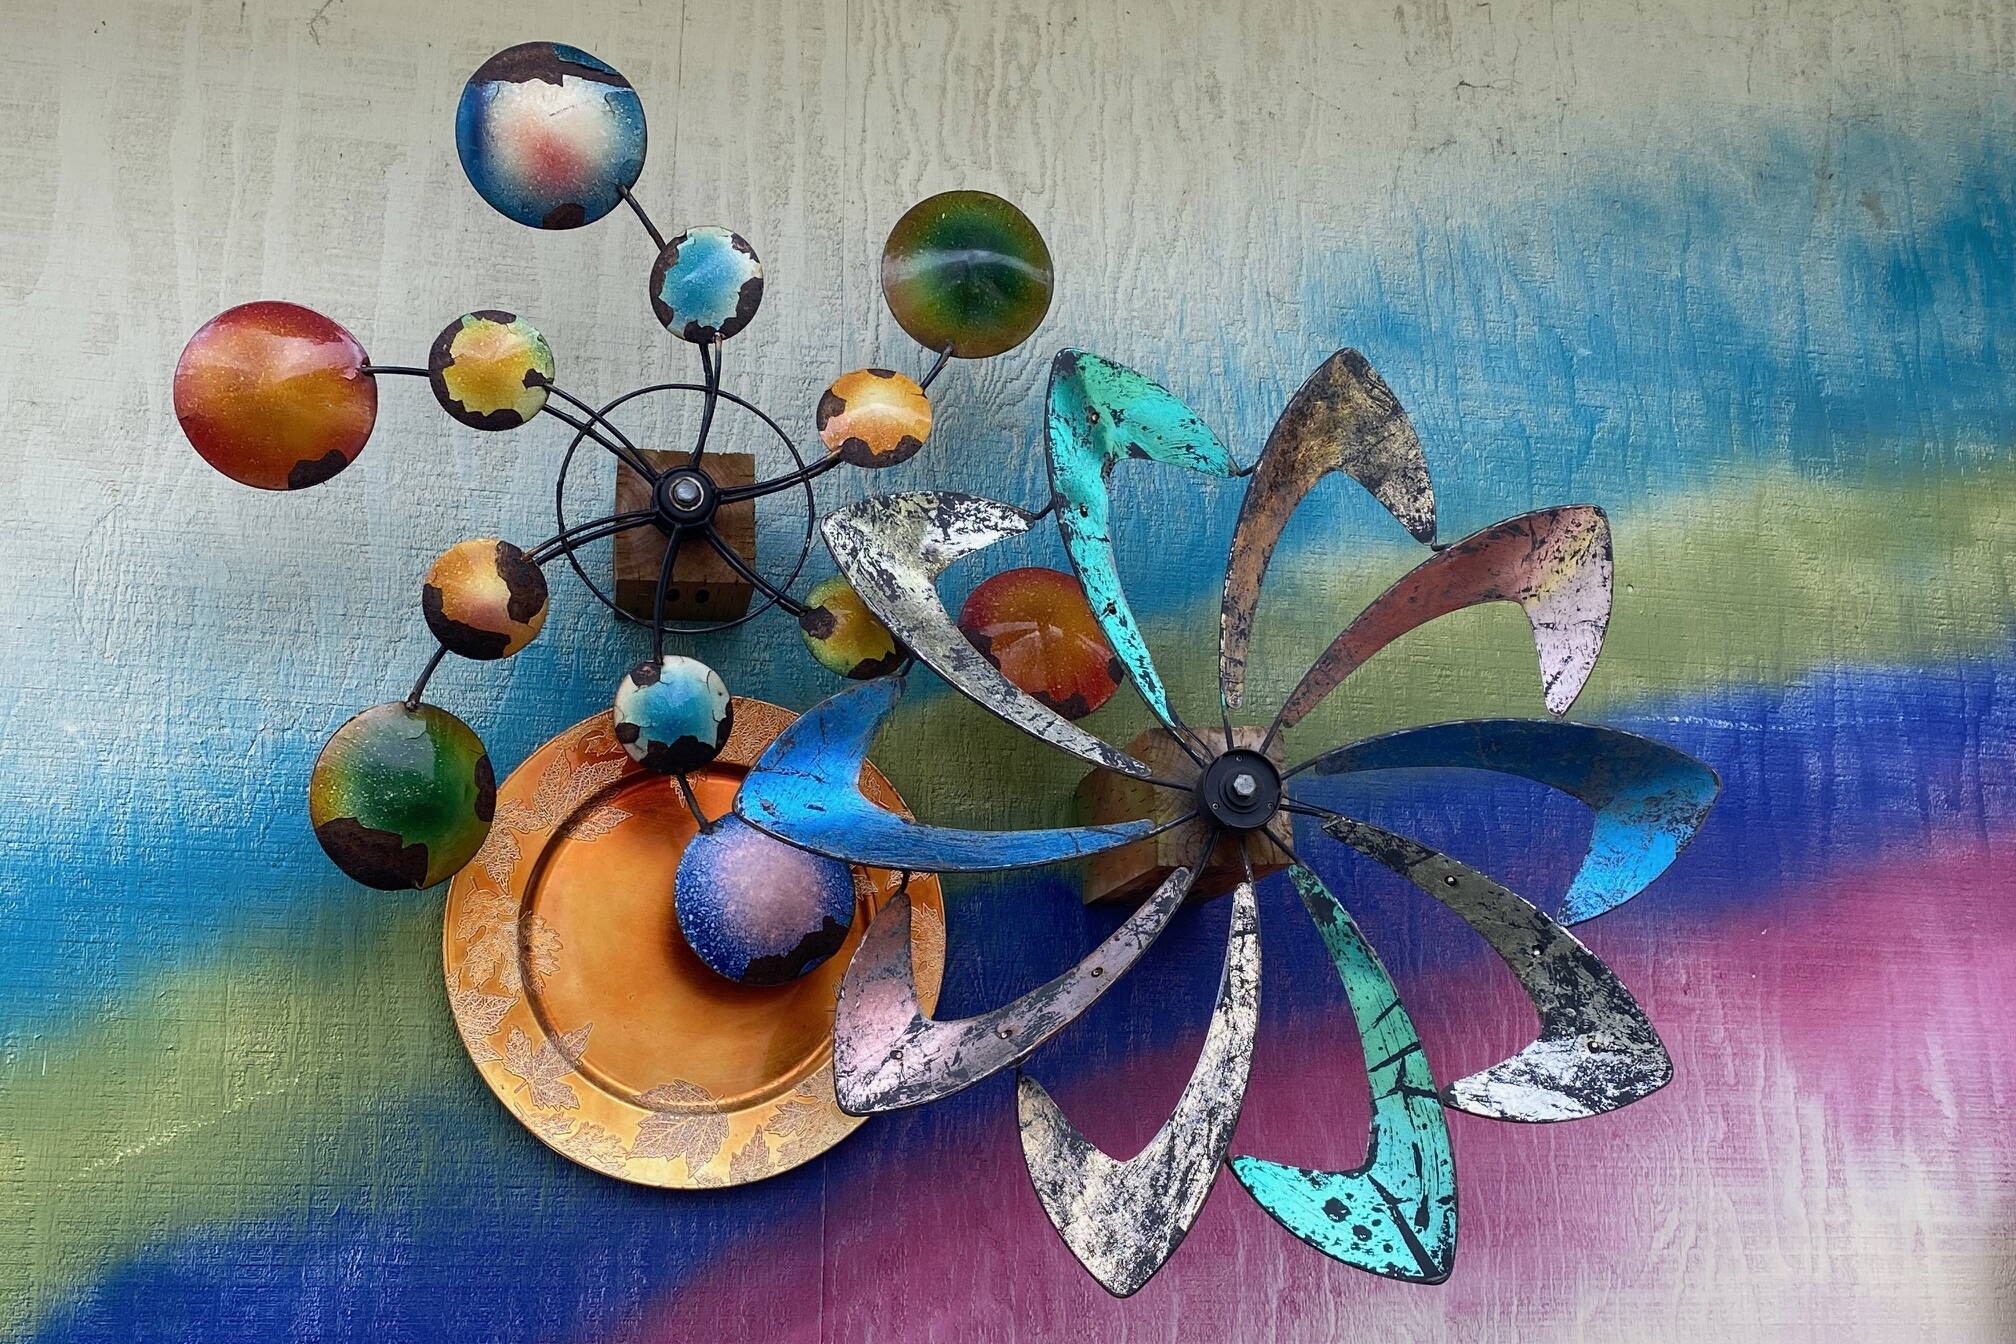 Spheres and spinners ride a rainbow on a downtown wall on Aug. 13. (Photo by Denise Carroll)